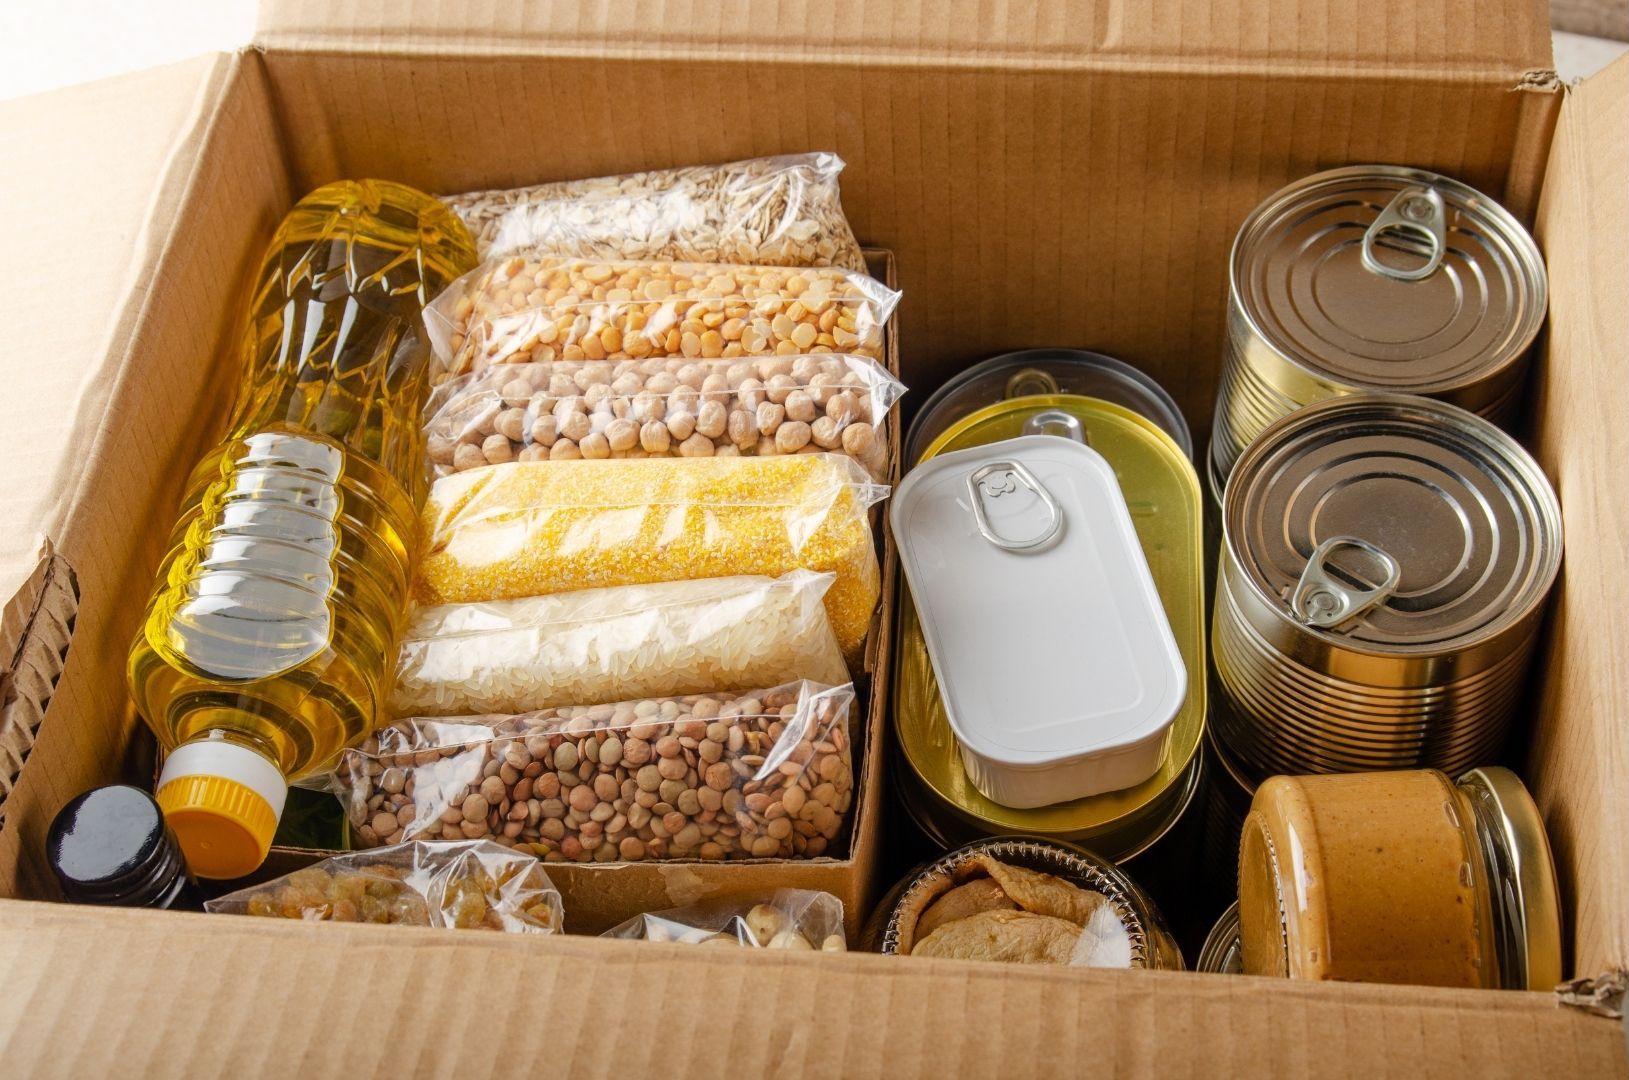 Easy to prepare food to stockpile for emergencies or disasters